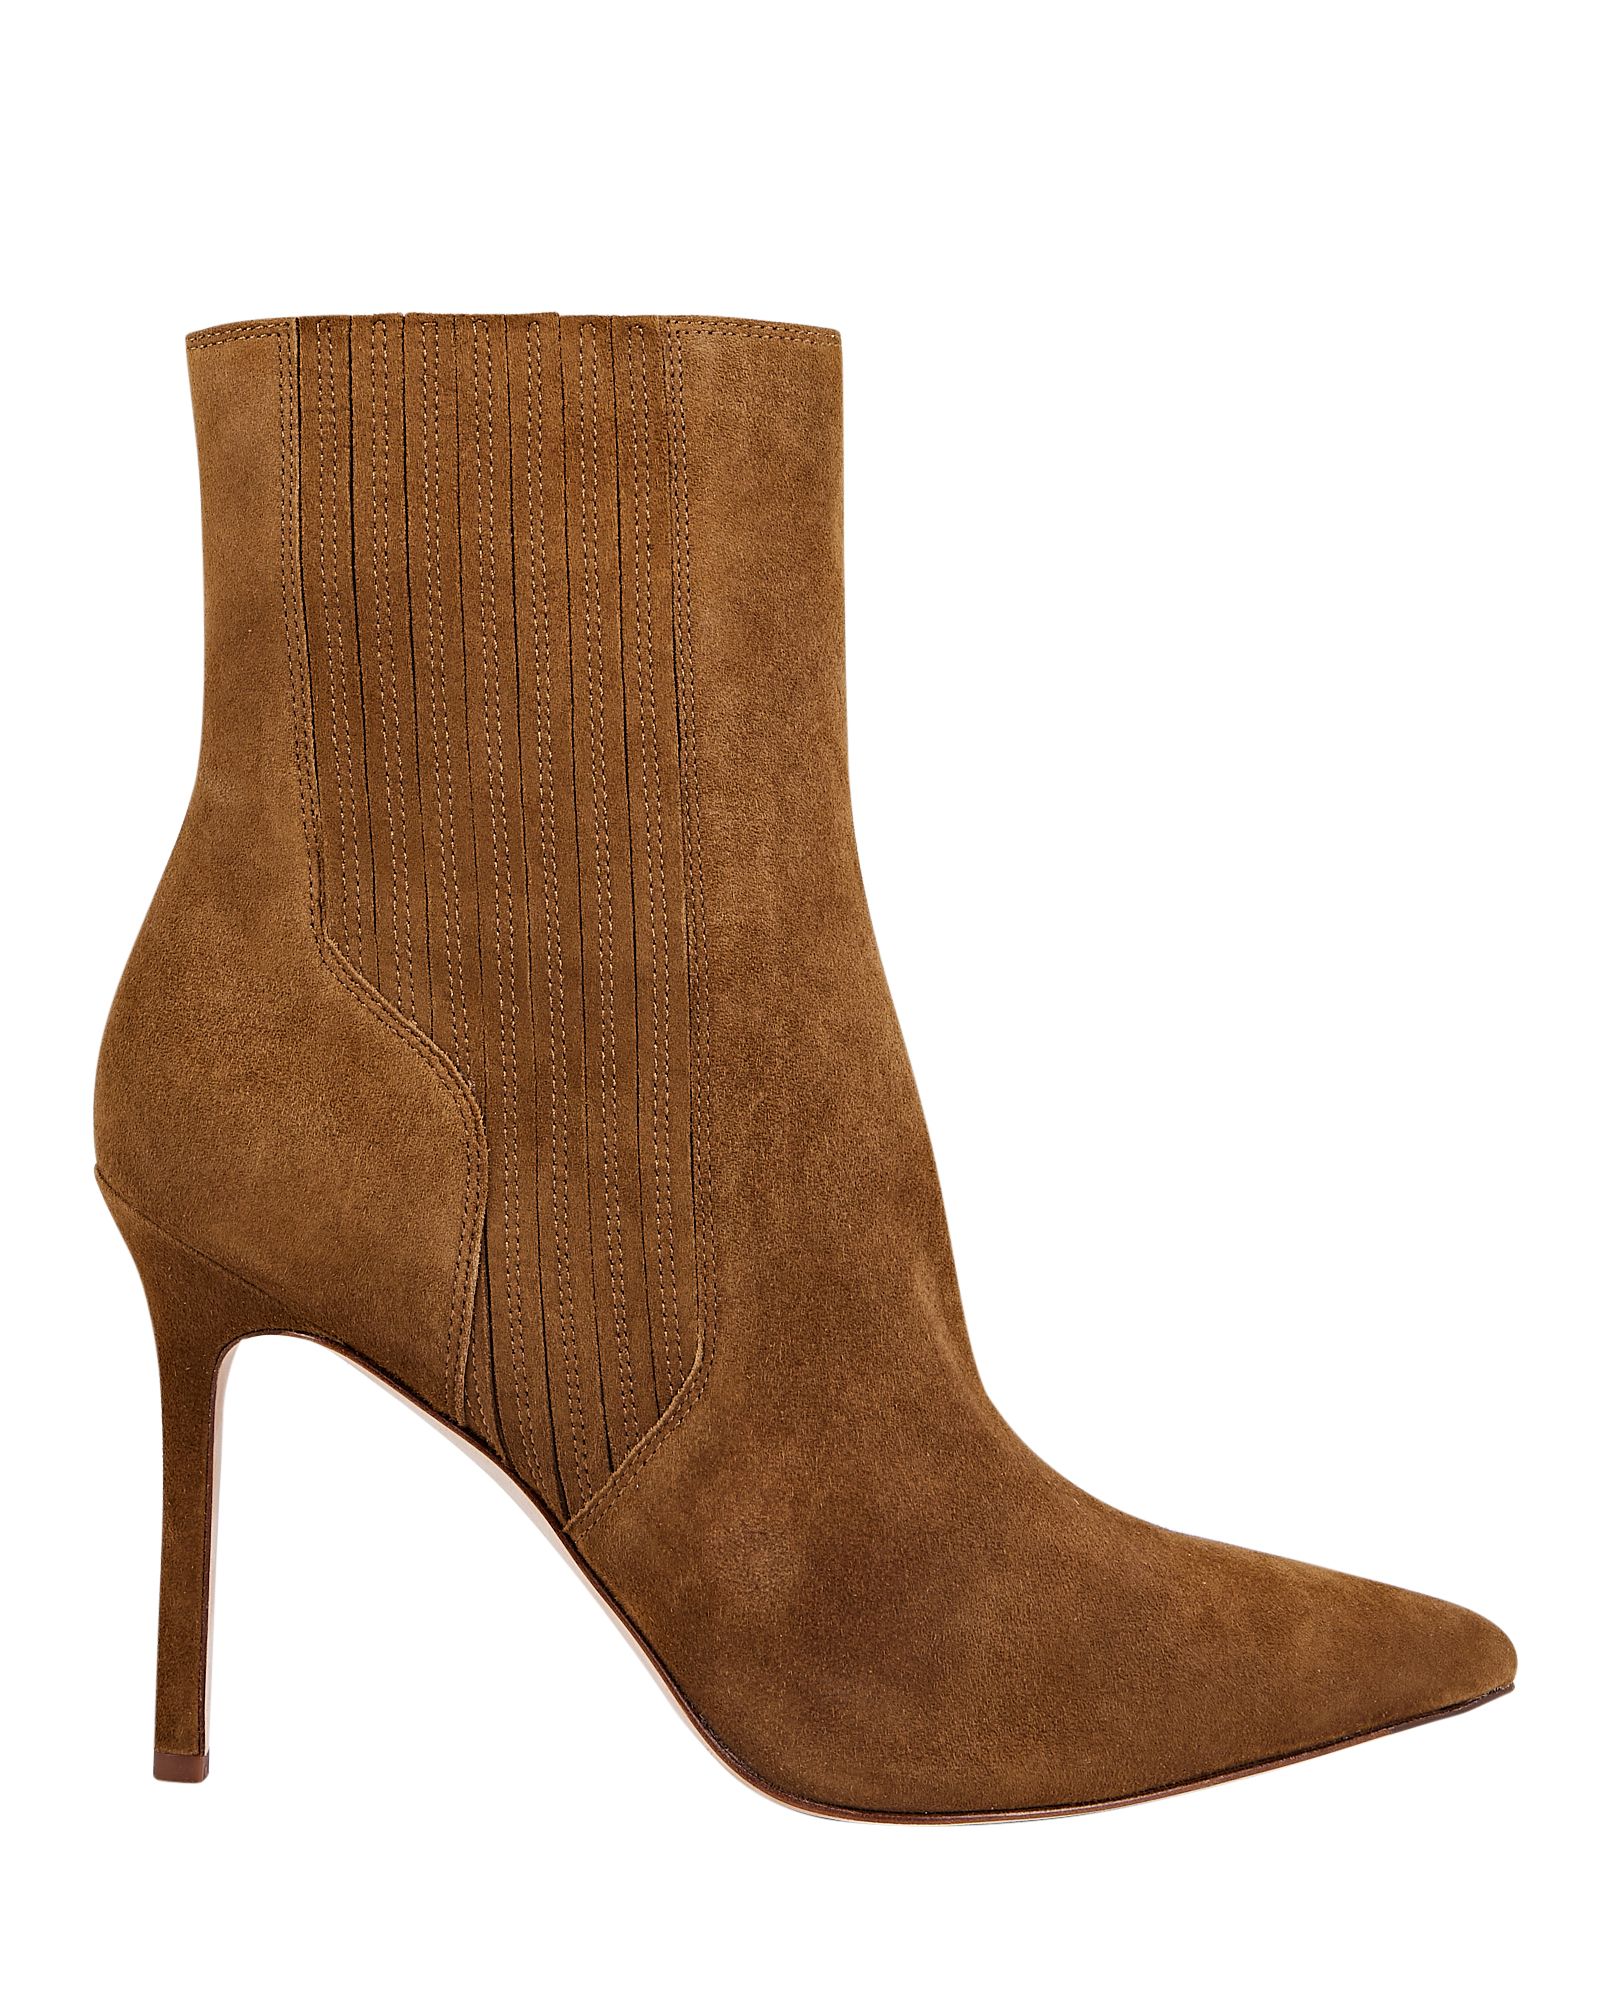 Lisa Suede Ankle Boots | INTERMIX